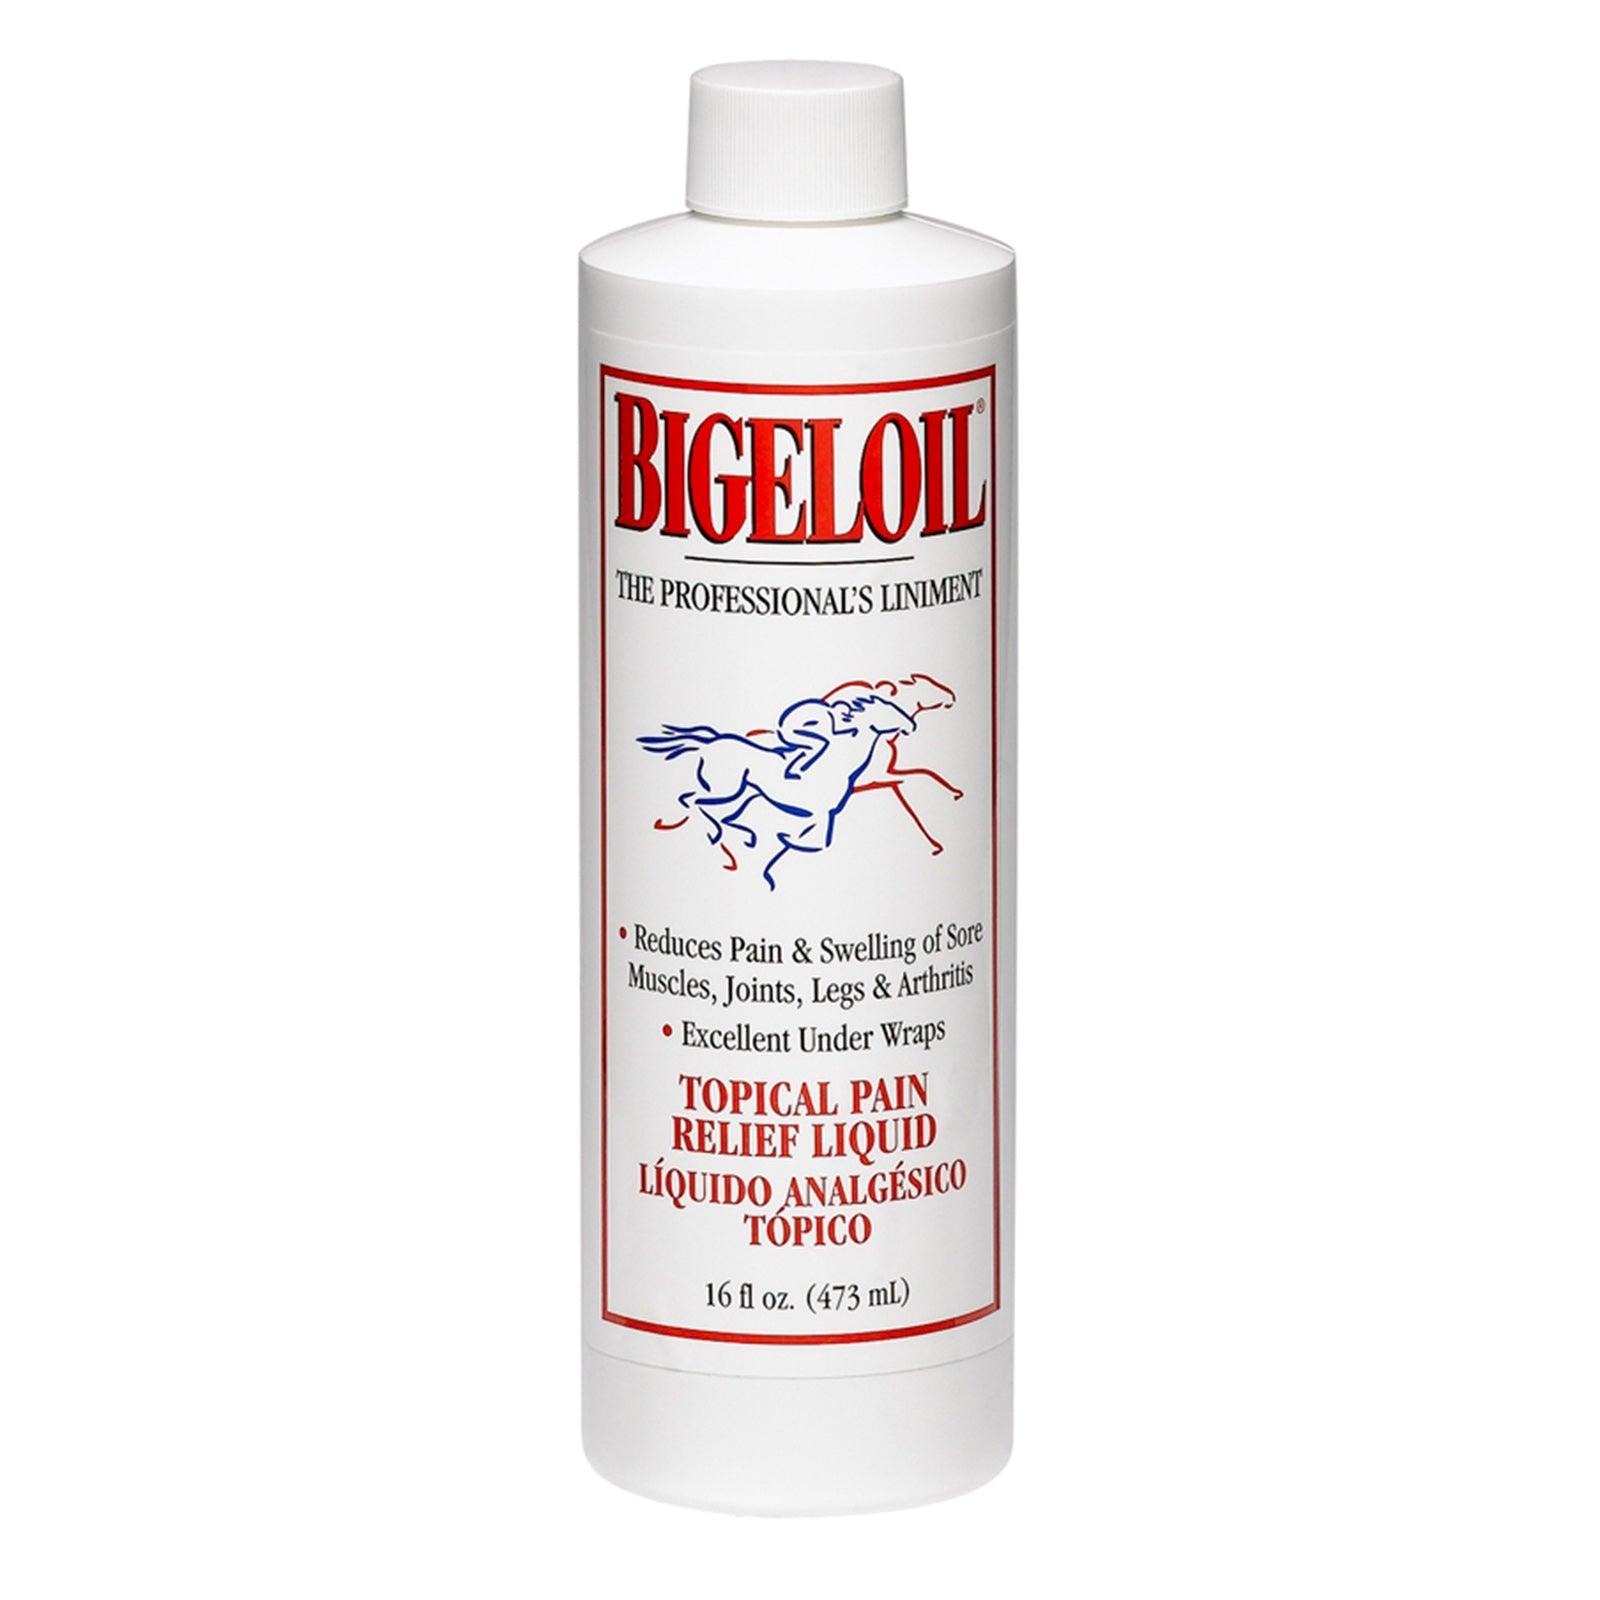 Bigeloil the professional's liniment.  Topical pain relief liquid.